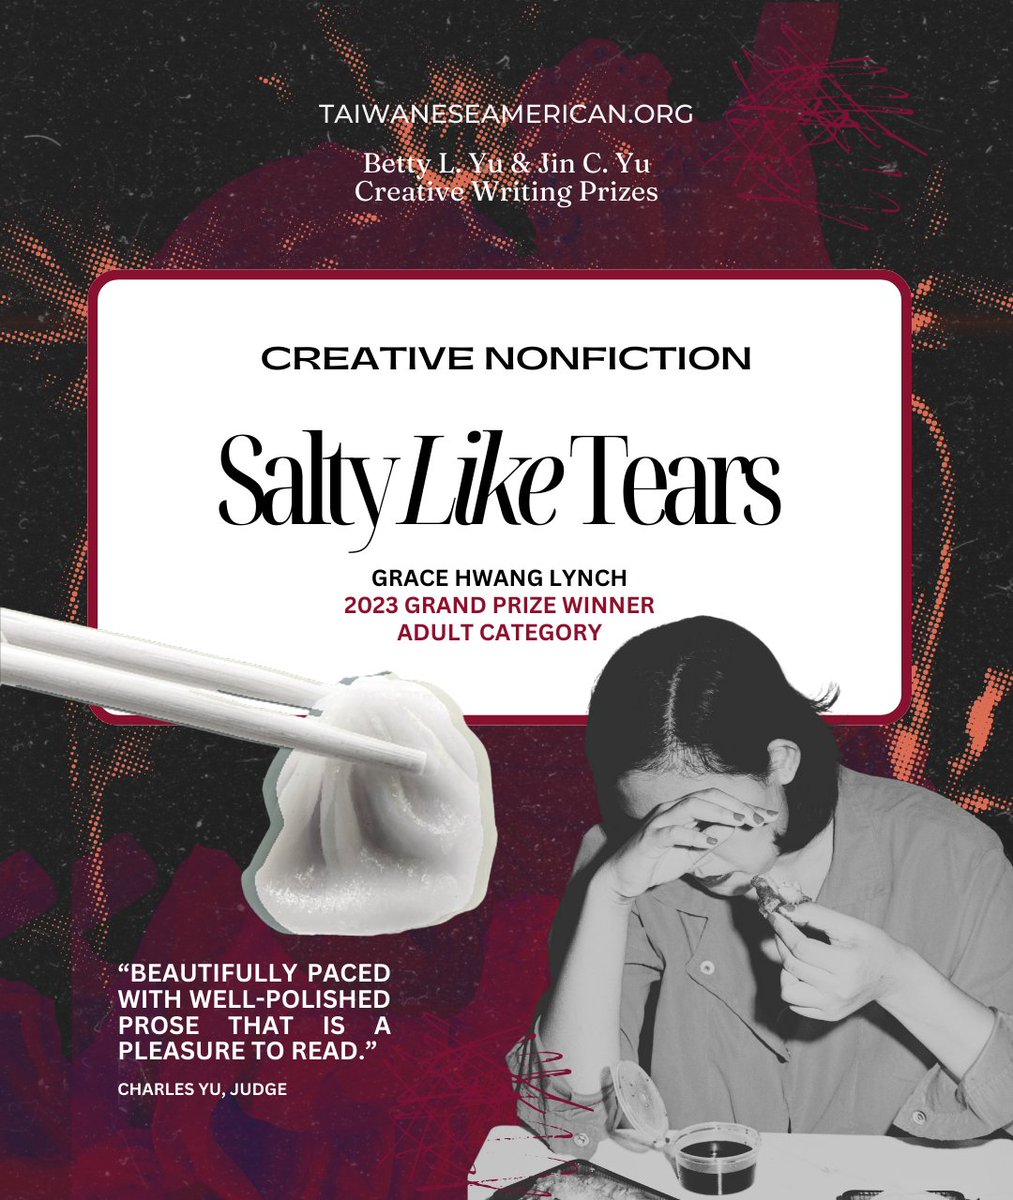 #Taiwanese #Hokkien phrase of the week bûn-tsiunn 文章 an essay, article, paper, writing, composition I highly recommend everyone read this beautiful creative non-fiction essay: Salty LIke Tears by Grace Hwang Lynch.